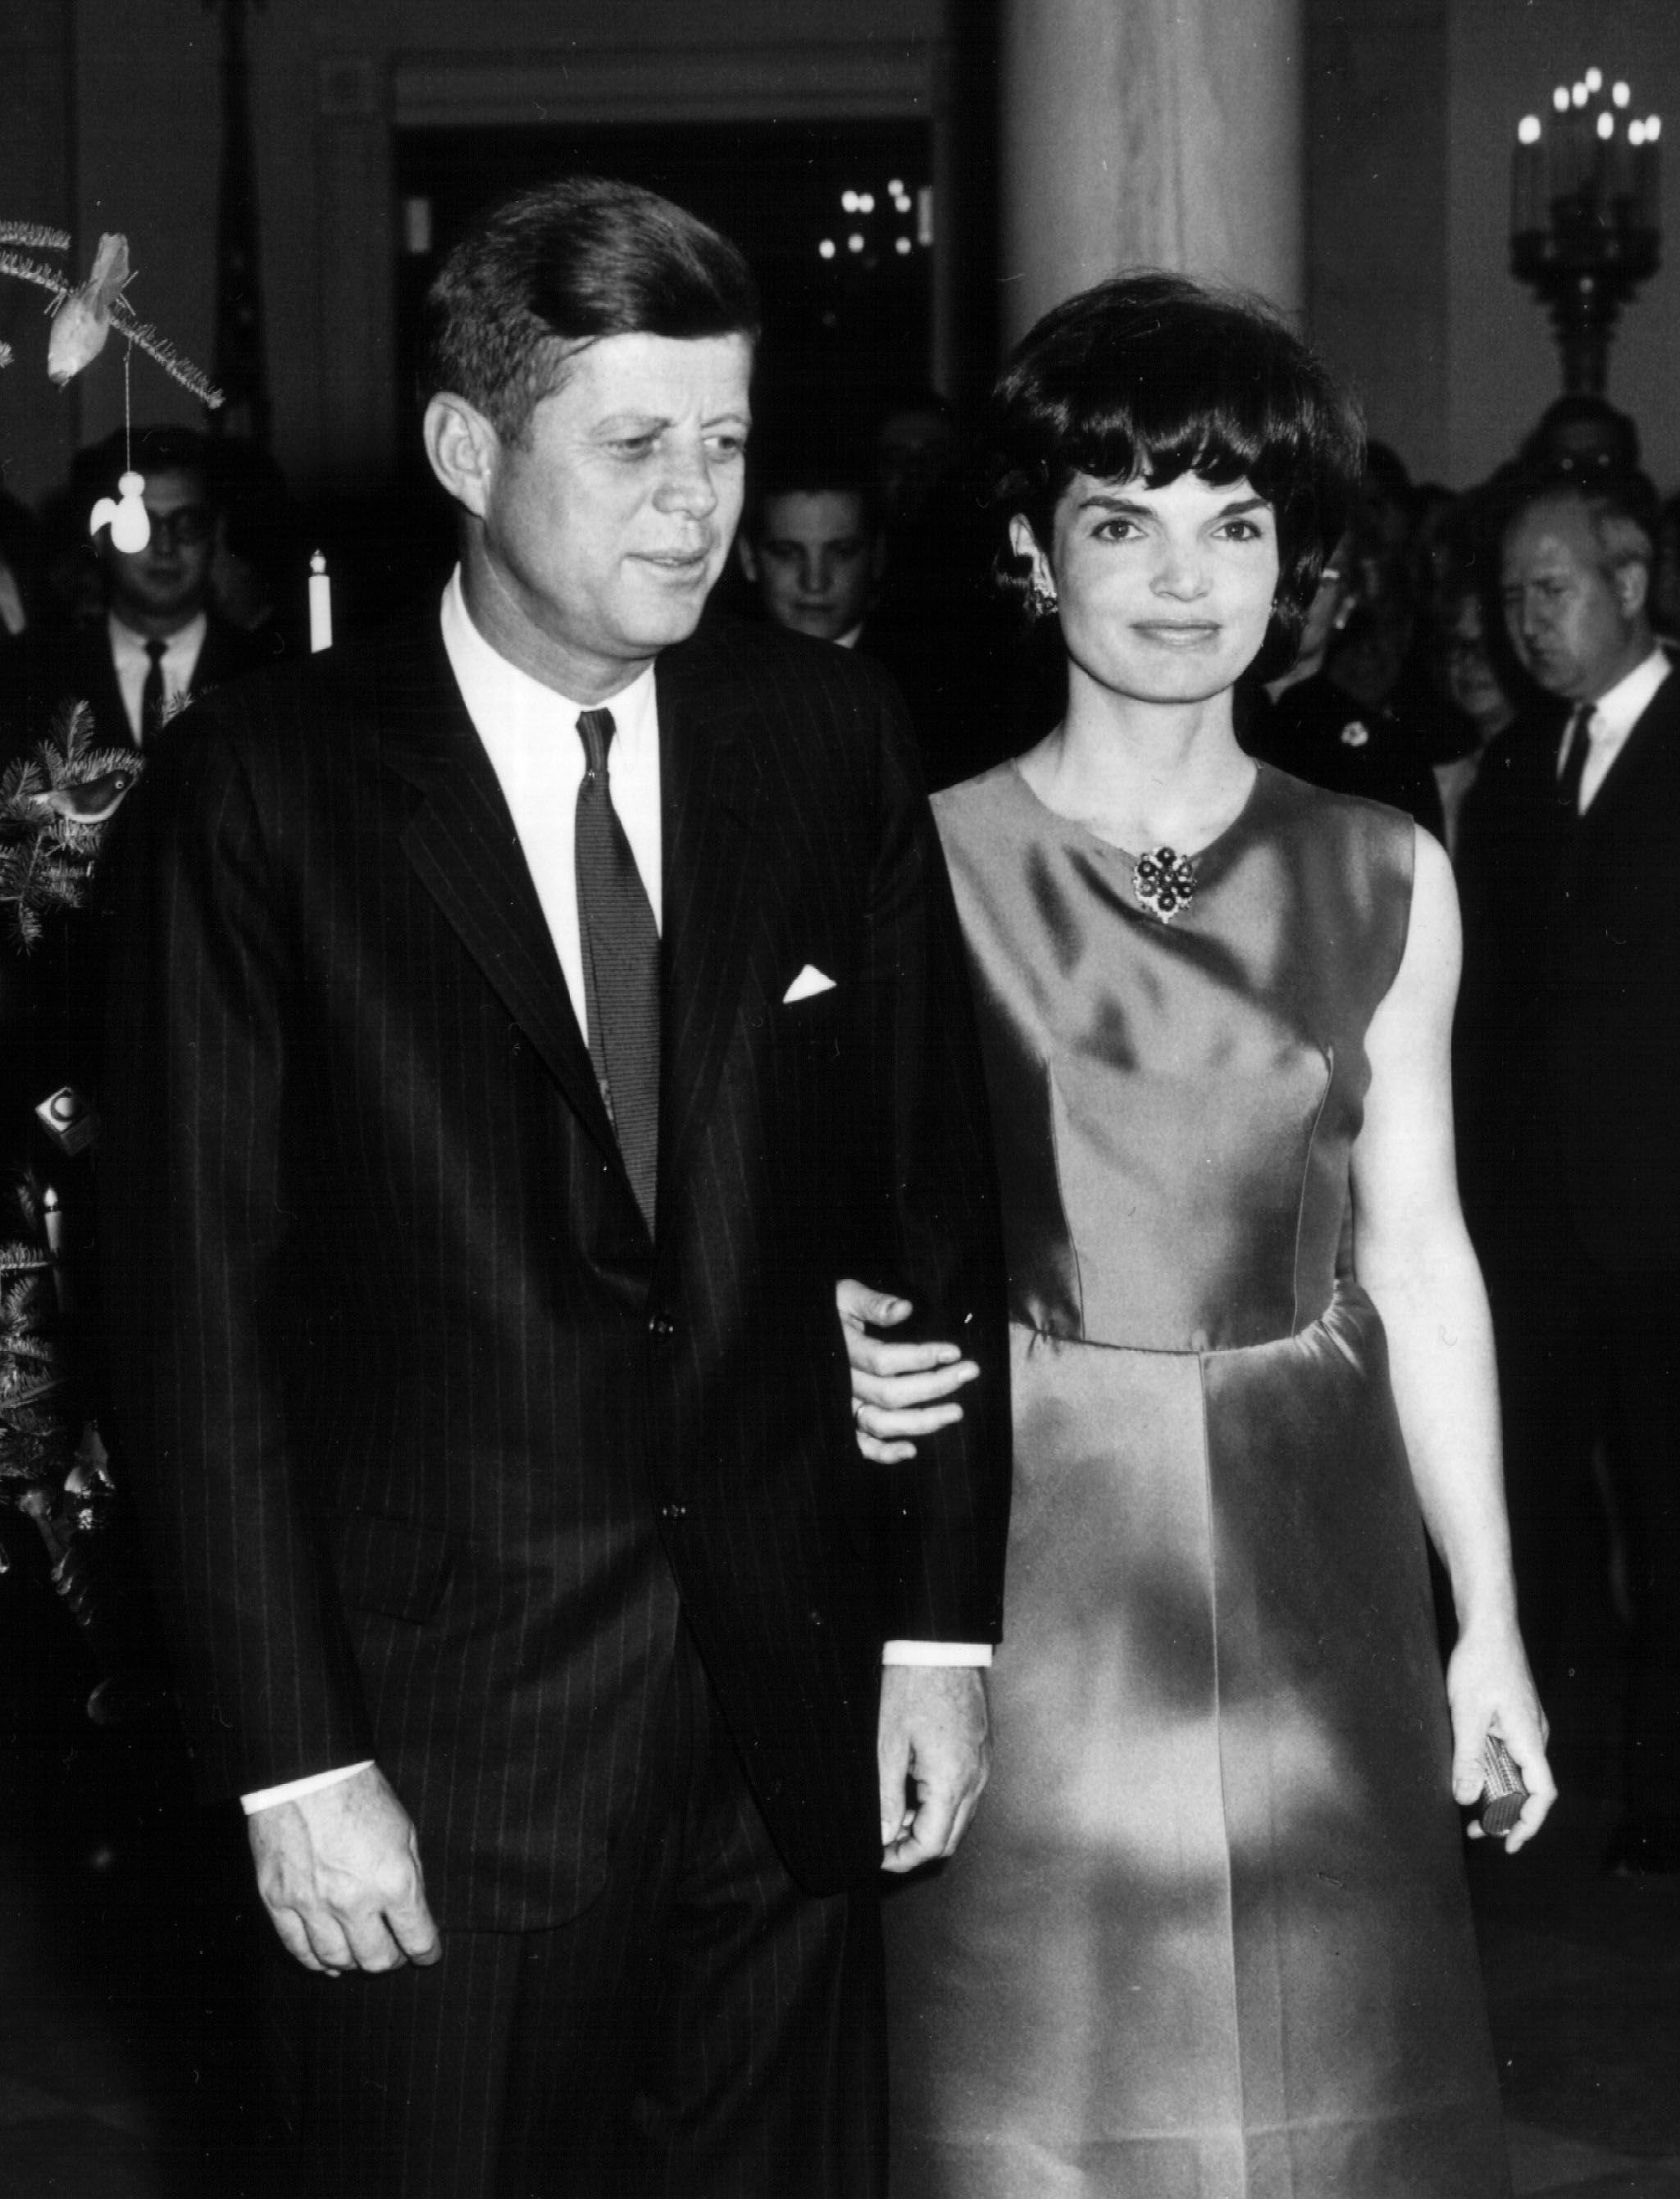 President John F. Kennedy and First Lady Jacqueline Kennedy at a White House ceremony in December 1962, in Washington, DC. | Source: Courtesy of National Archive/Newsmakers/Getty Images